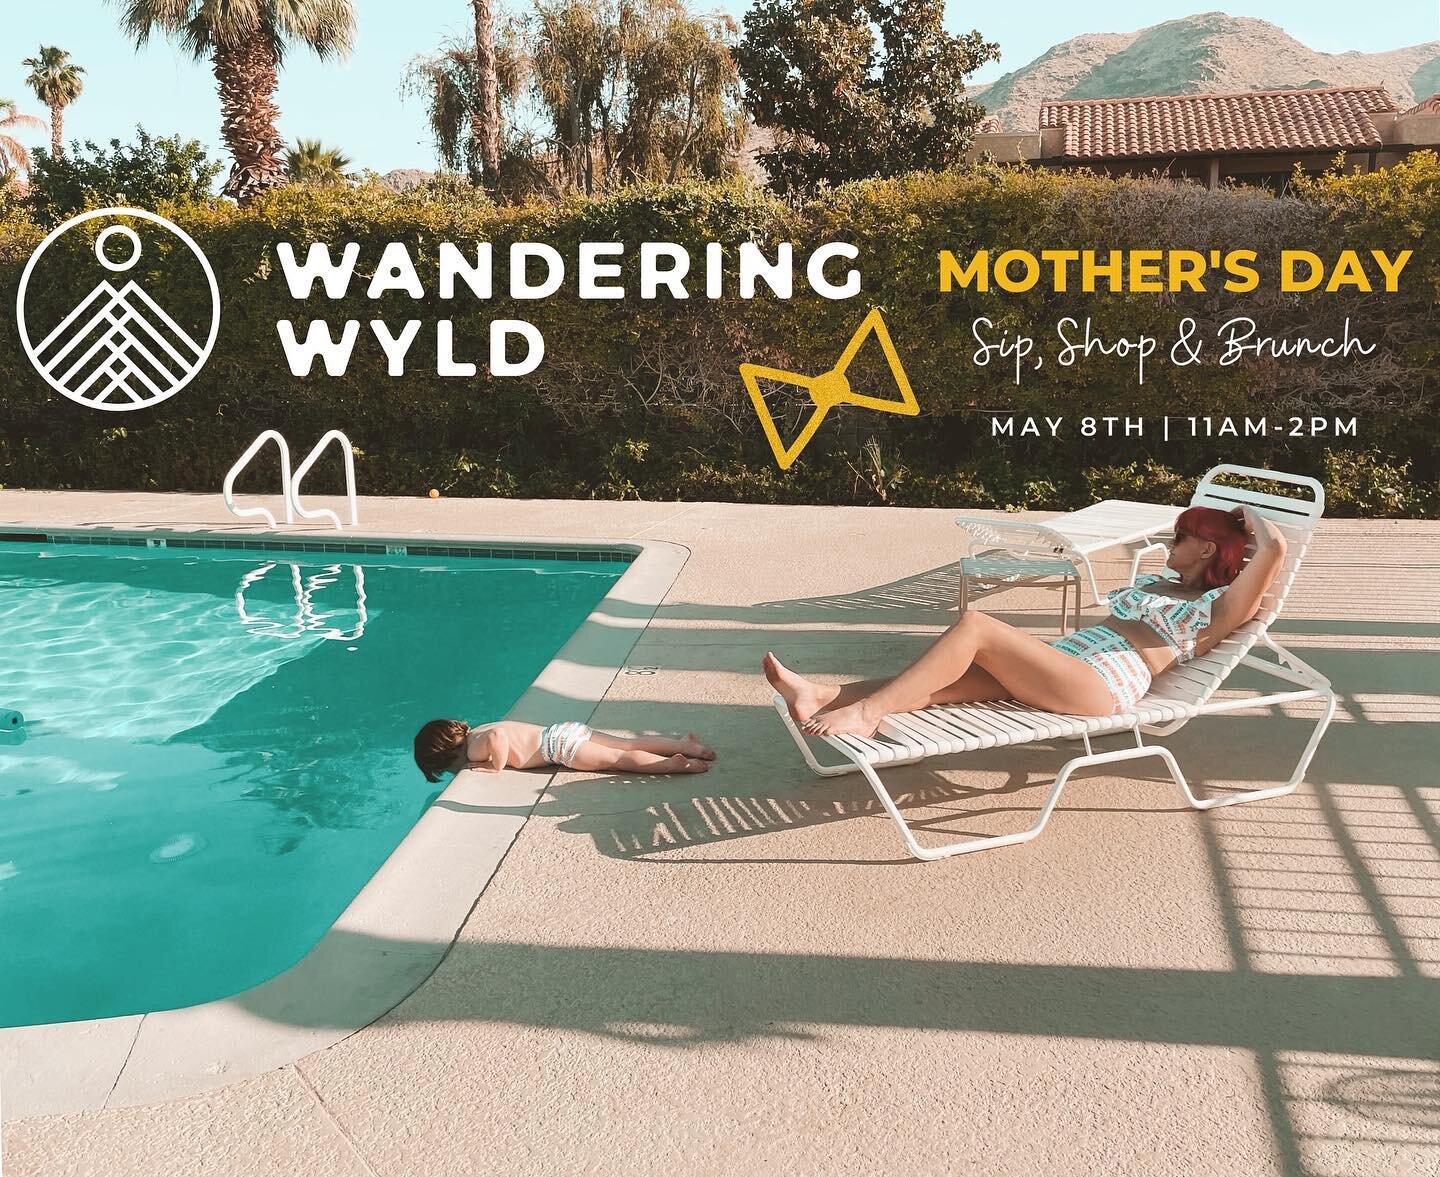 Join us for @wanderingwyld Sip, Shop &amp; Brunch this Mother&rsquo;s Day!🥂 

We will have our new 2022 suits for mamas and babes!

Location: @thealpinereno 
Date: May 8th
Time: 11-2pm
Brunch: Visit recordstreetbrewing.com to make brunch reservation